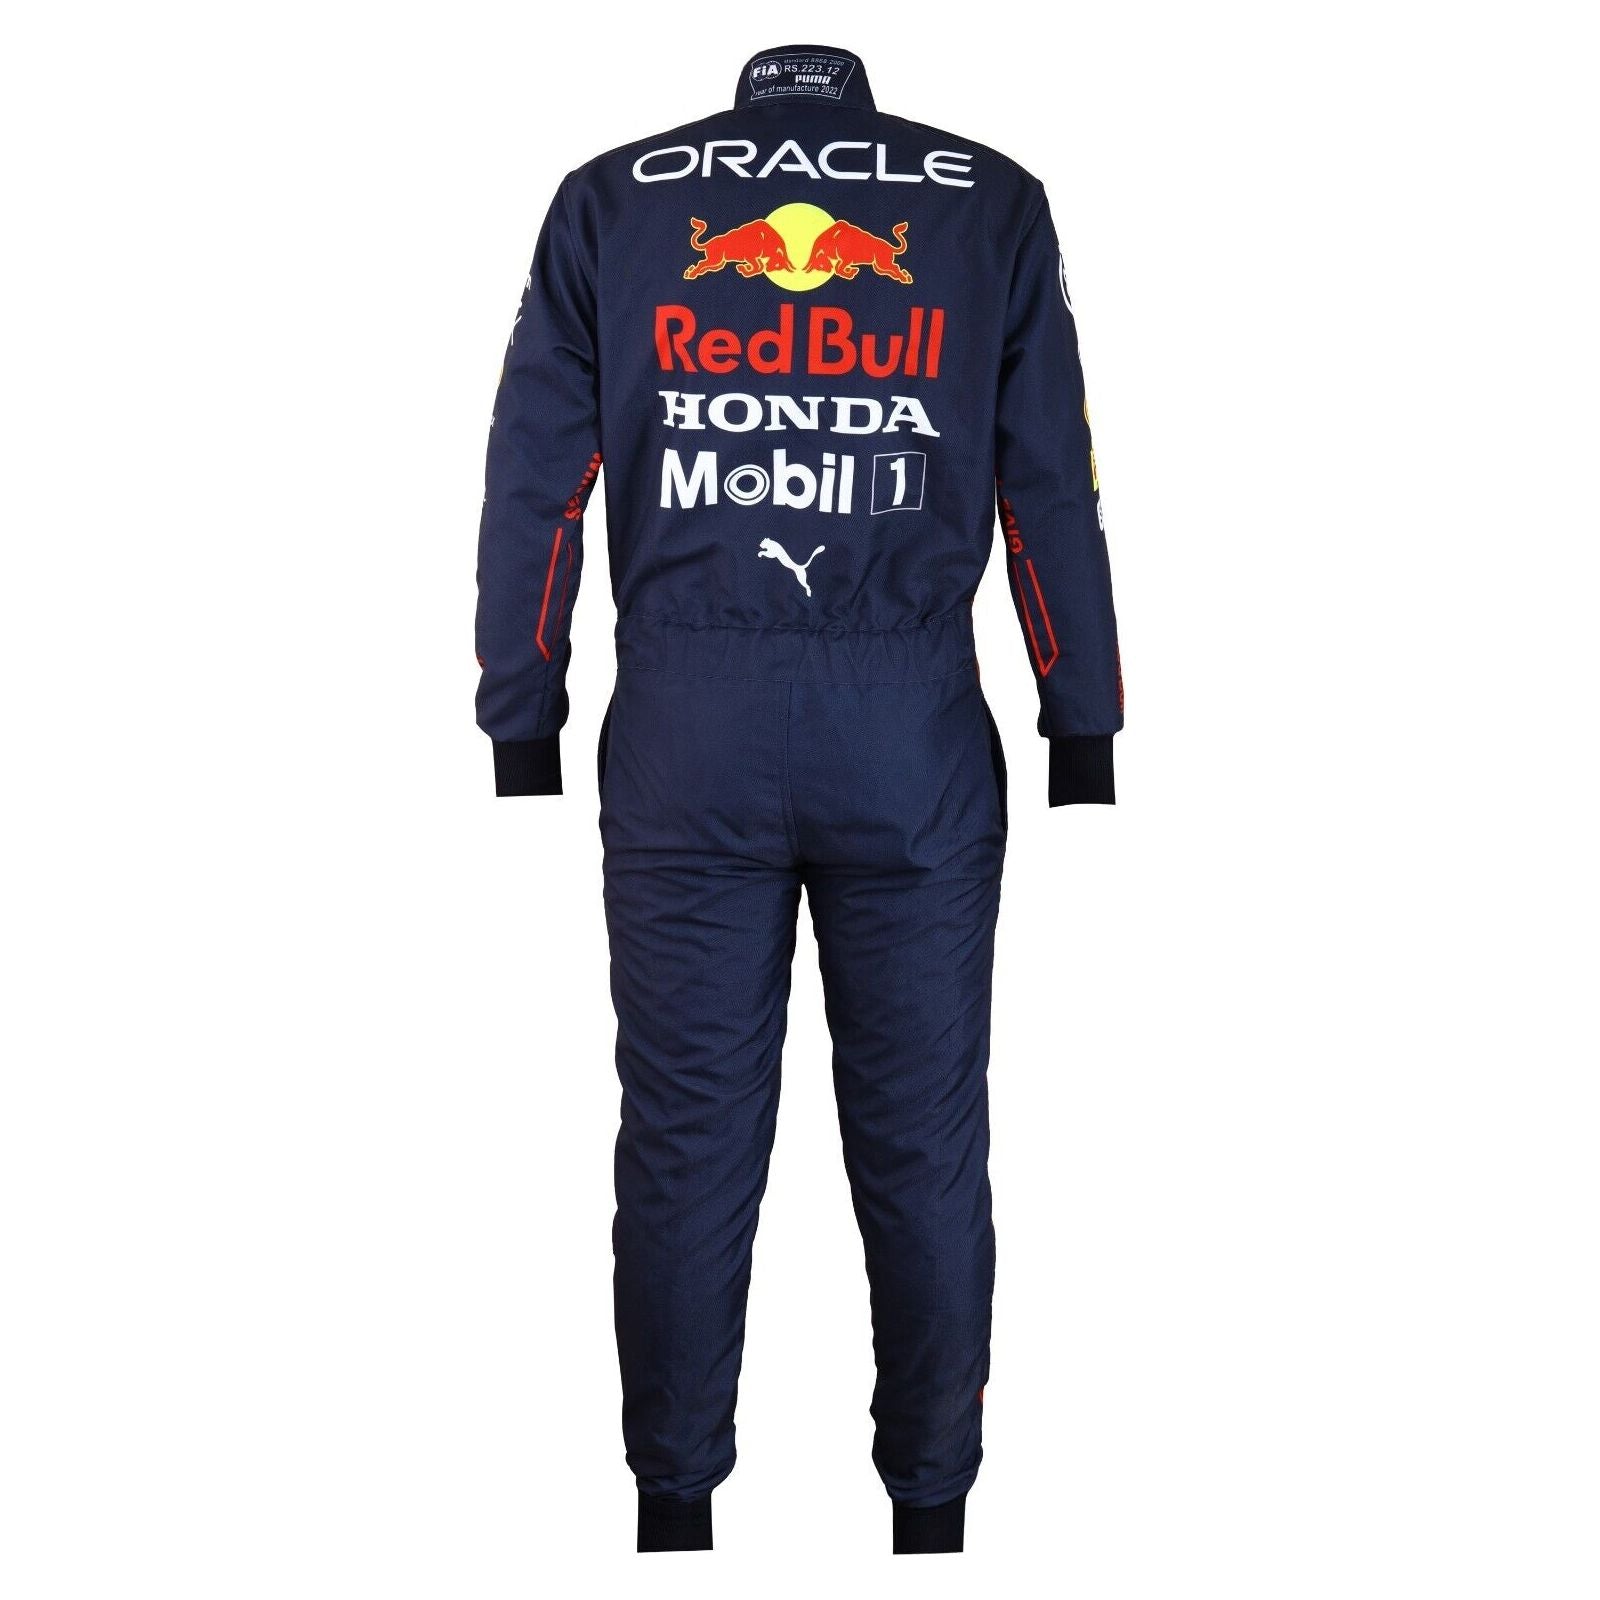 Kartex Race Fire Suits for Enhanced Safety  [Special edition]